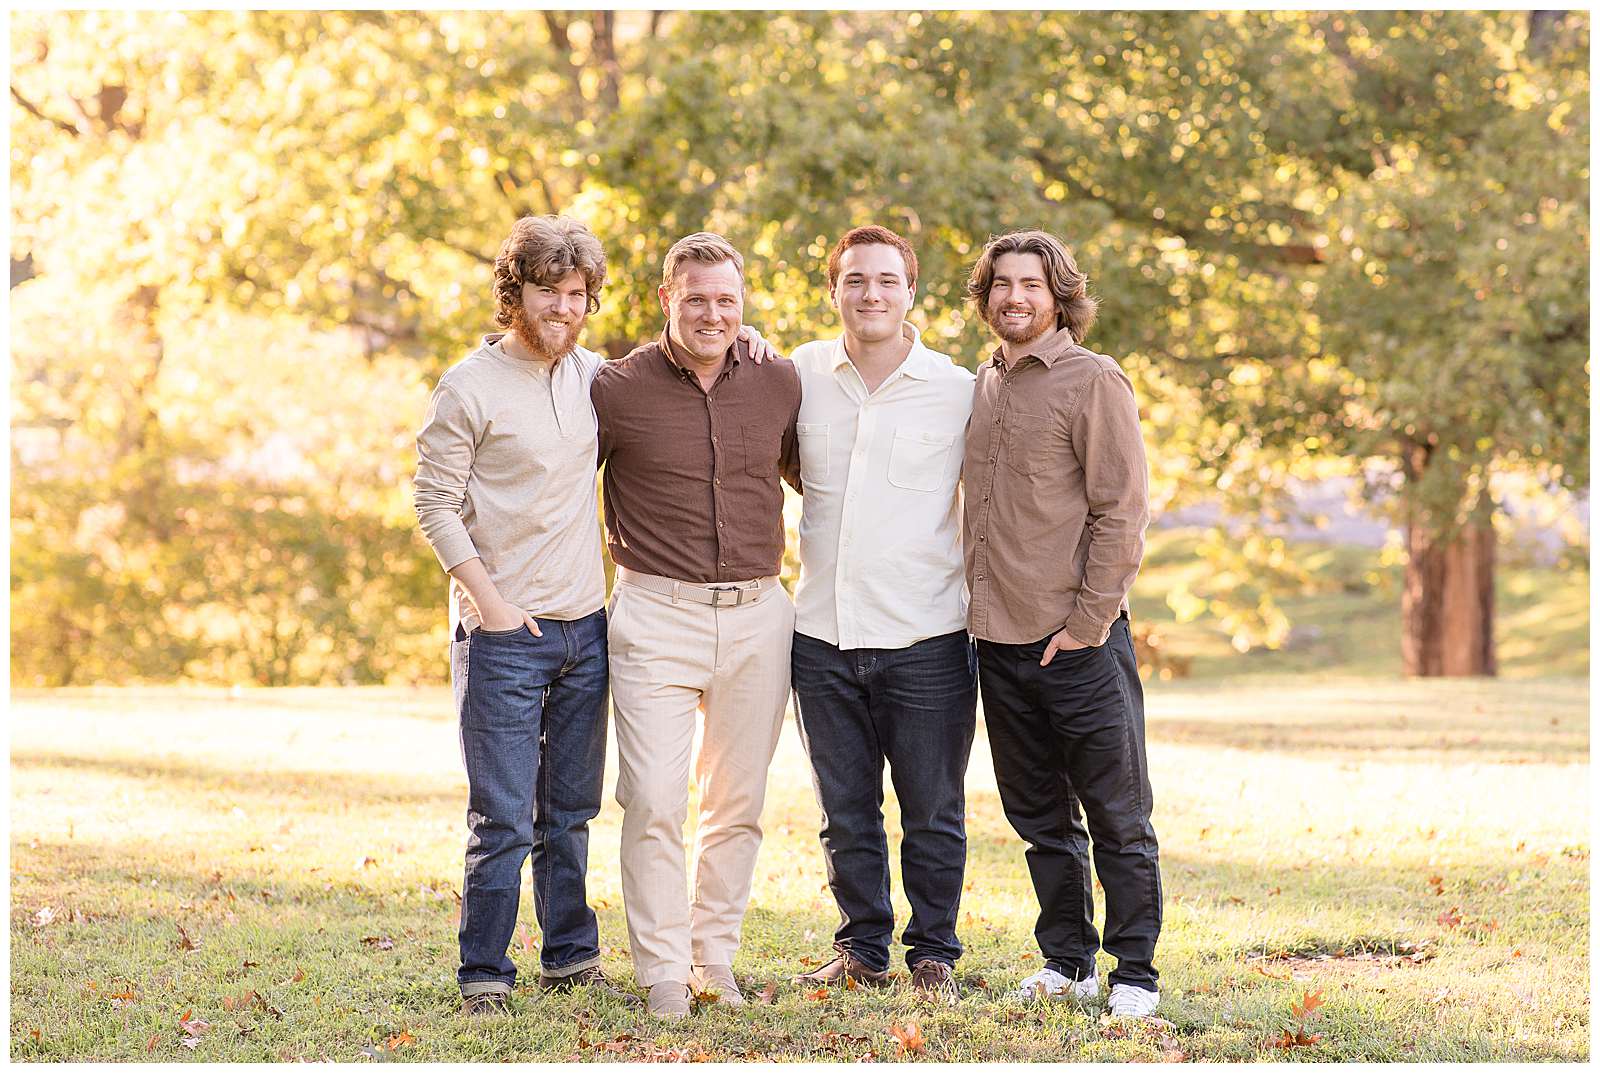 Dad stands in the middle wearing a brown button shirt and khakis as he stands with his arms around his grown 3 sons.  He has one on this left and the other 2 on his right.  The boys wear jeans and coordinating tones of tan.